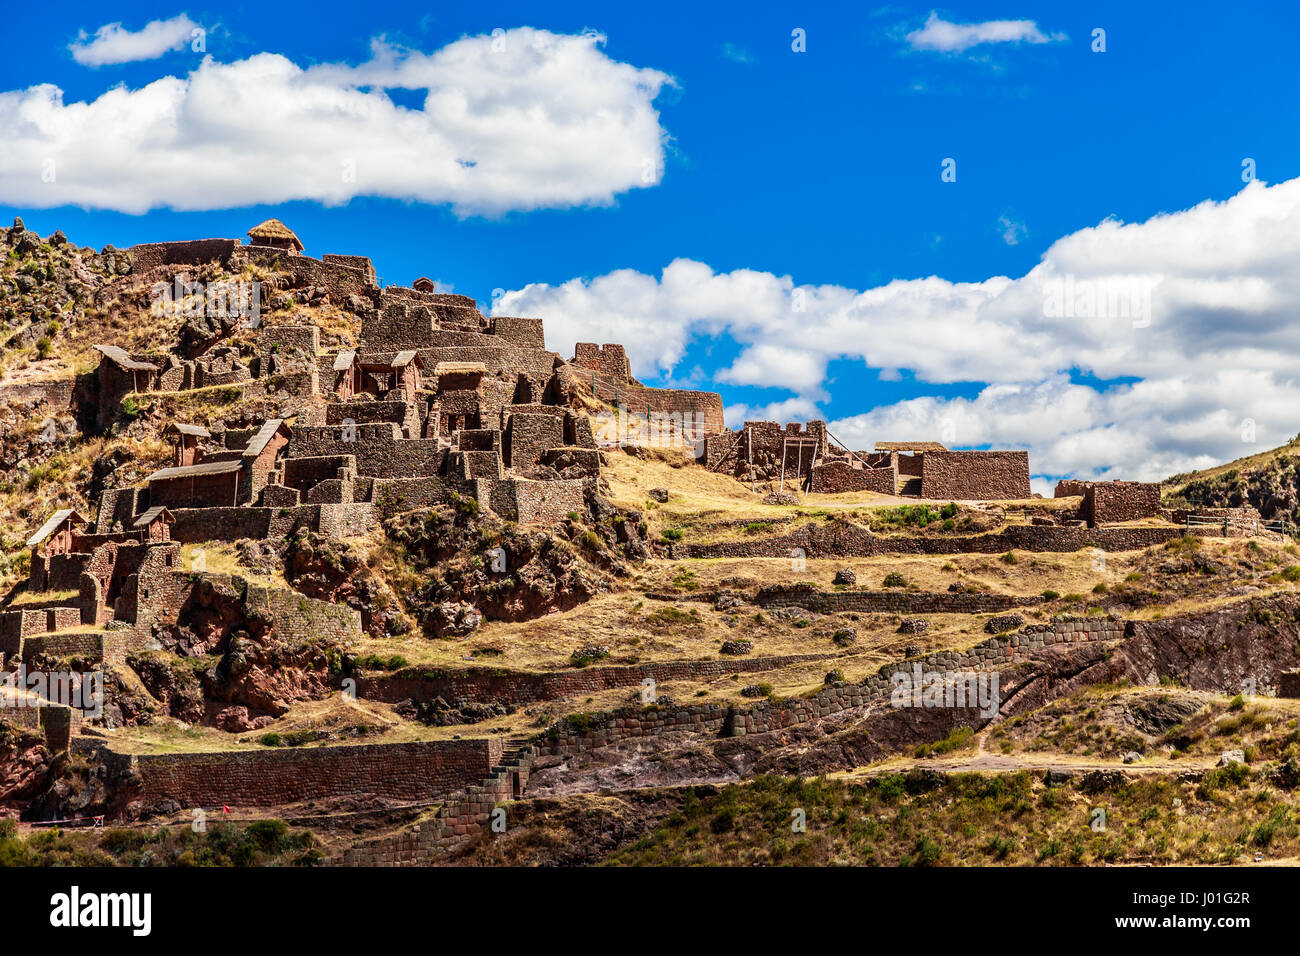 Ruins of ancient citadel of Inkas on the mountain, Pisac, Peru Stock Photo